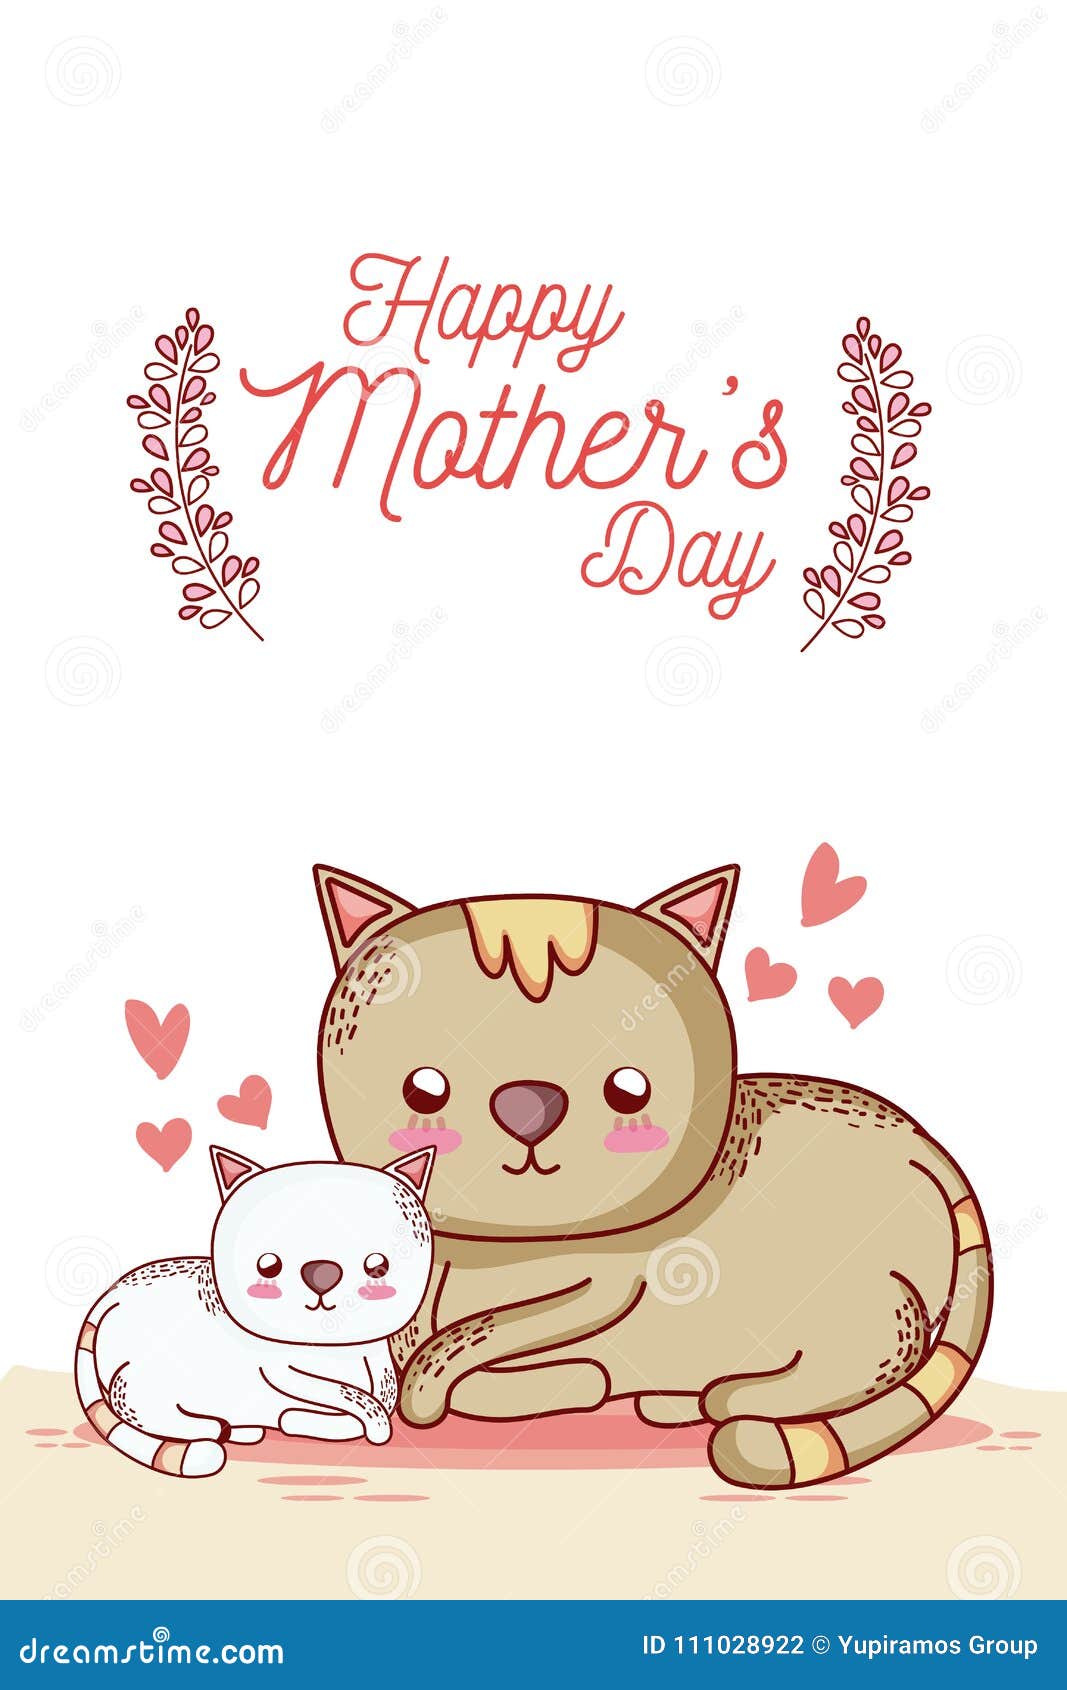 Happy Mothers Day Card with Cute Animals Cartoons Stock Vector ...